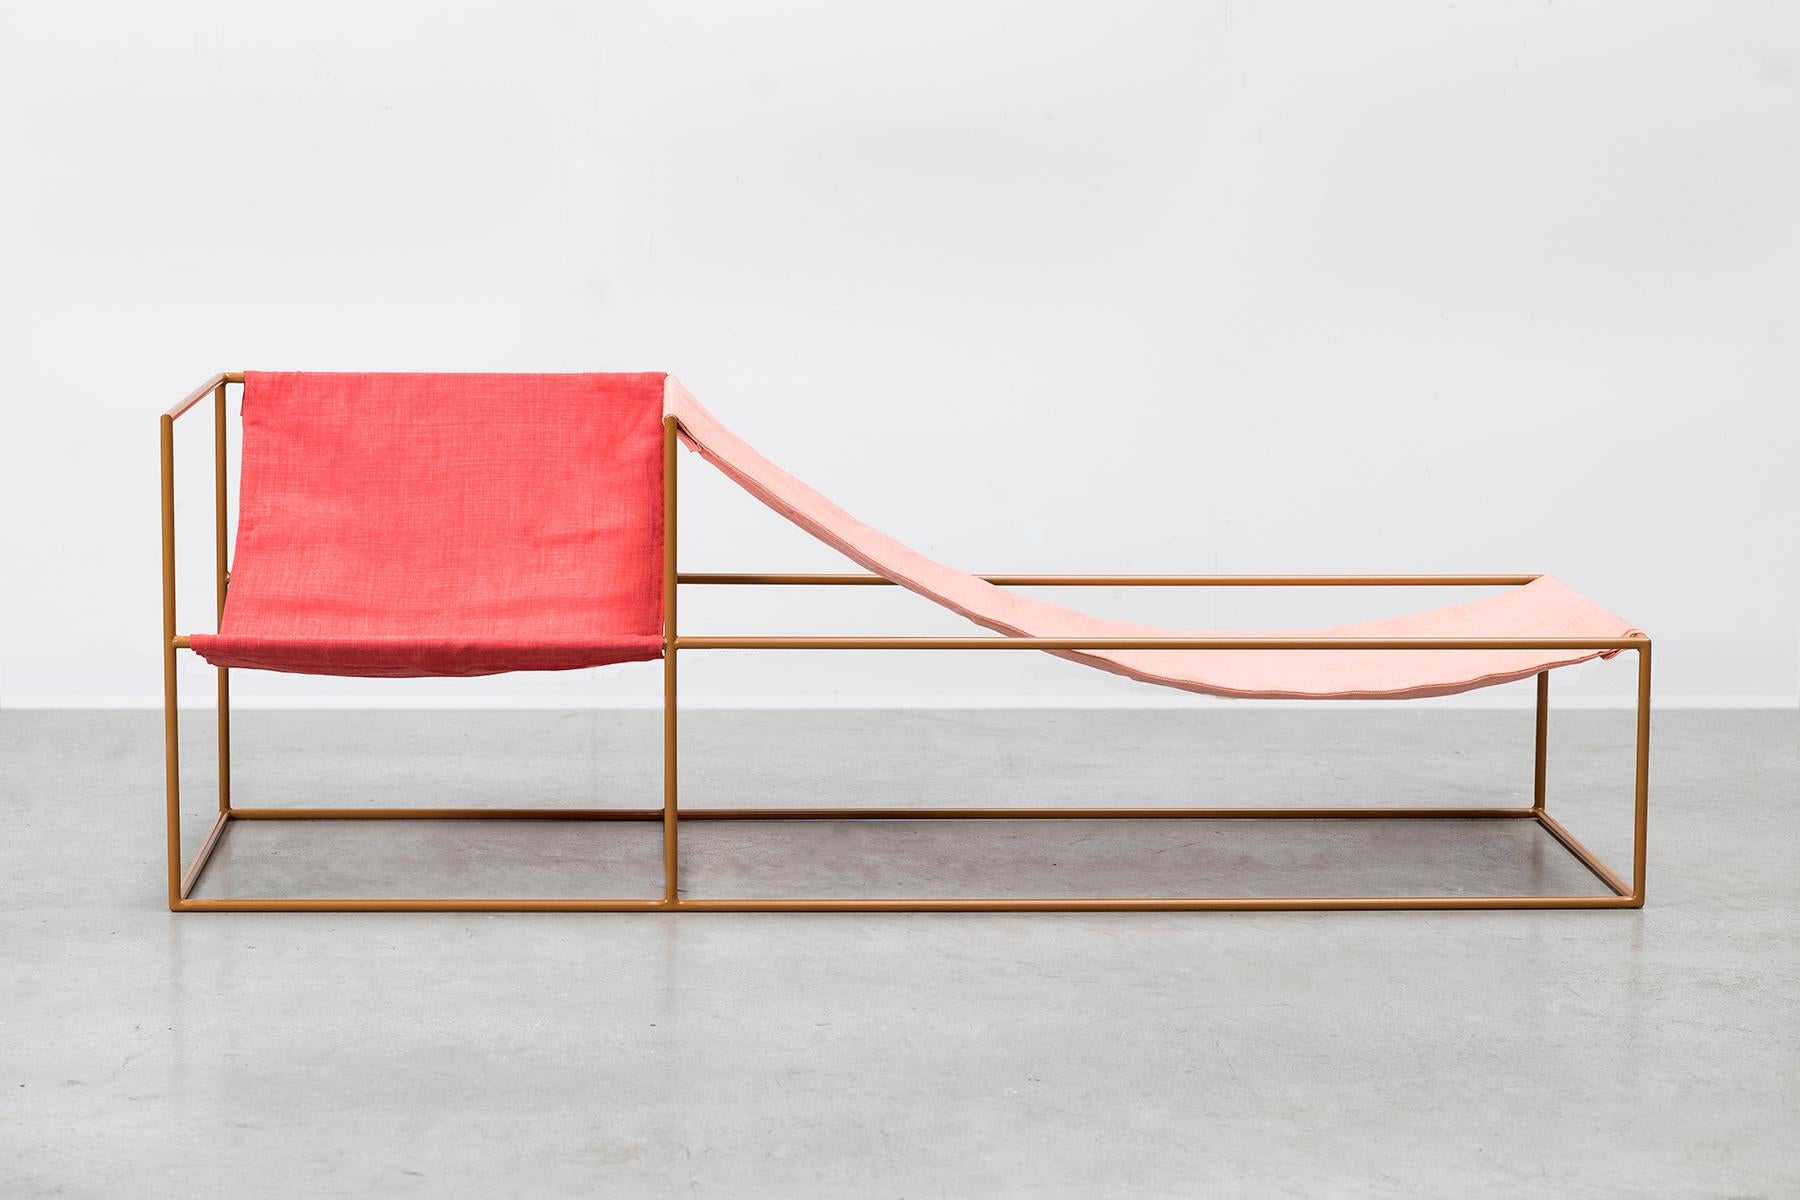 Duo Set Contemporary Seating
by Muller Van severen

Model: laquered steel mustard + frame red seat left + pink seat right
Dimensions: H. 61 cm x 182 cm x 62 cm

Unlike a massive sofa that sheaths a part of the interior, the duo seat ensures